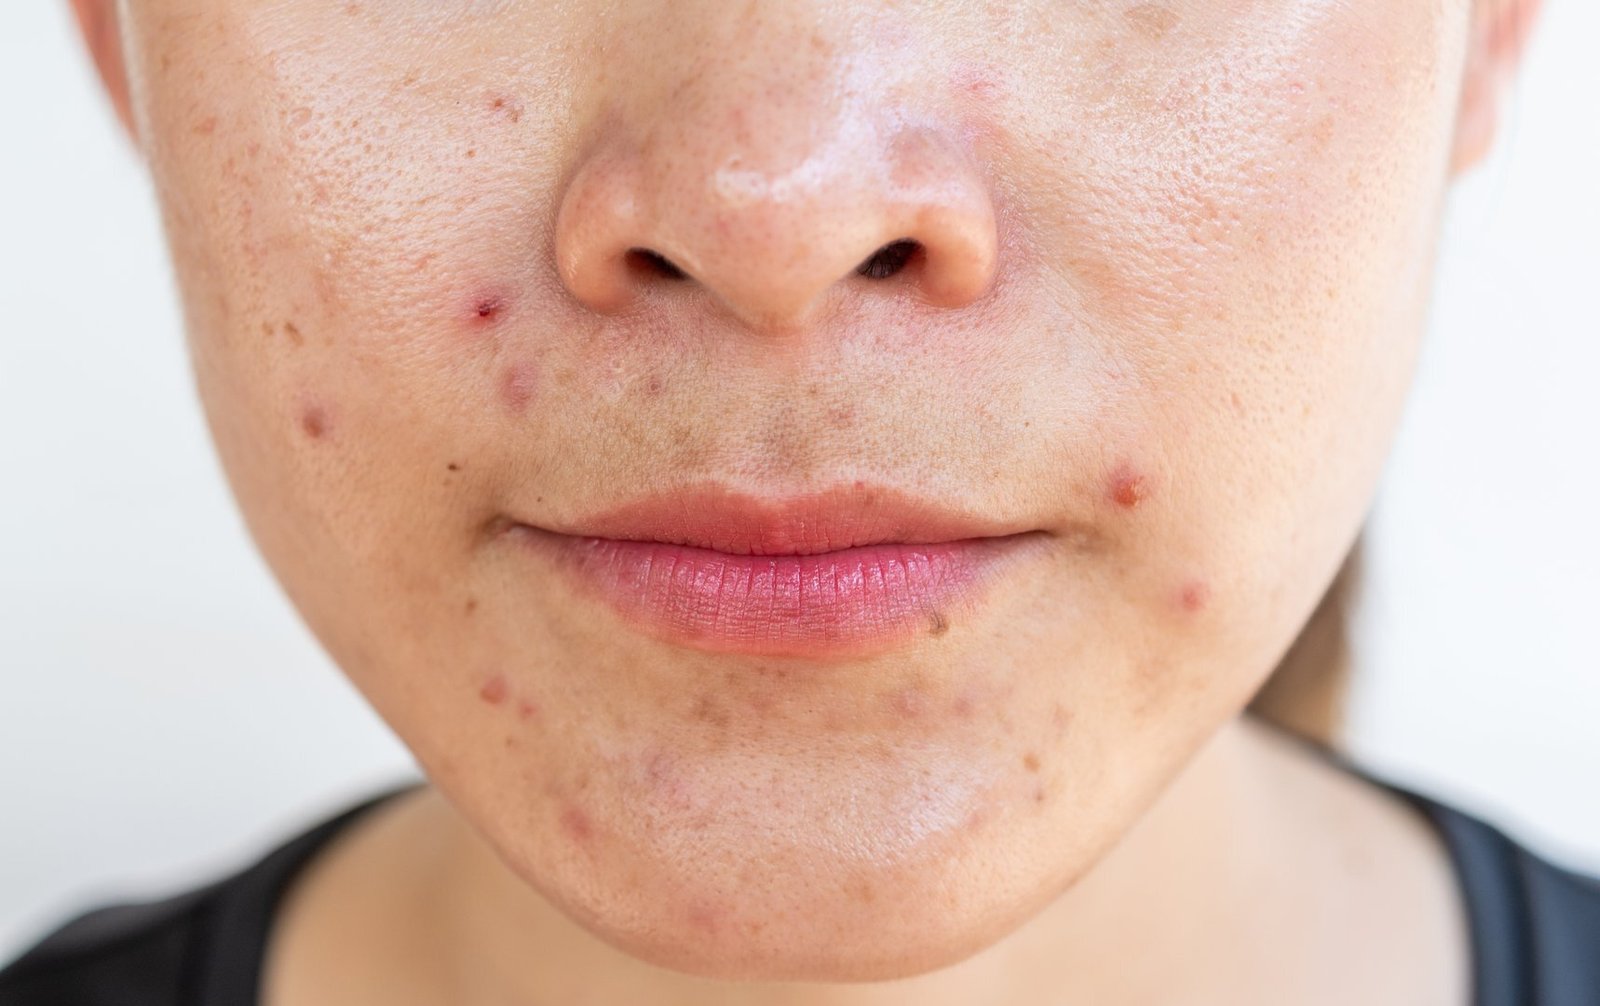 Isotretinoin effective for acne in those receiving gender-affirming therapy, study shows